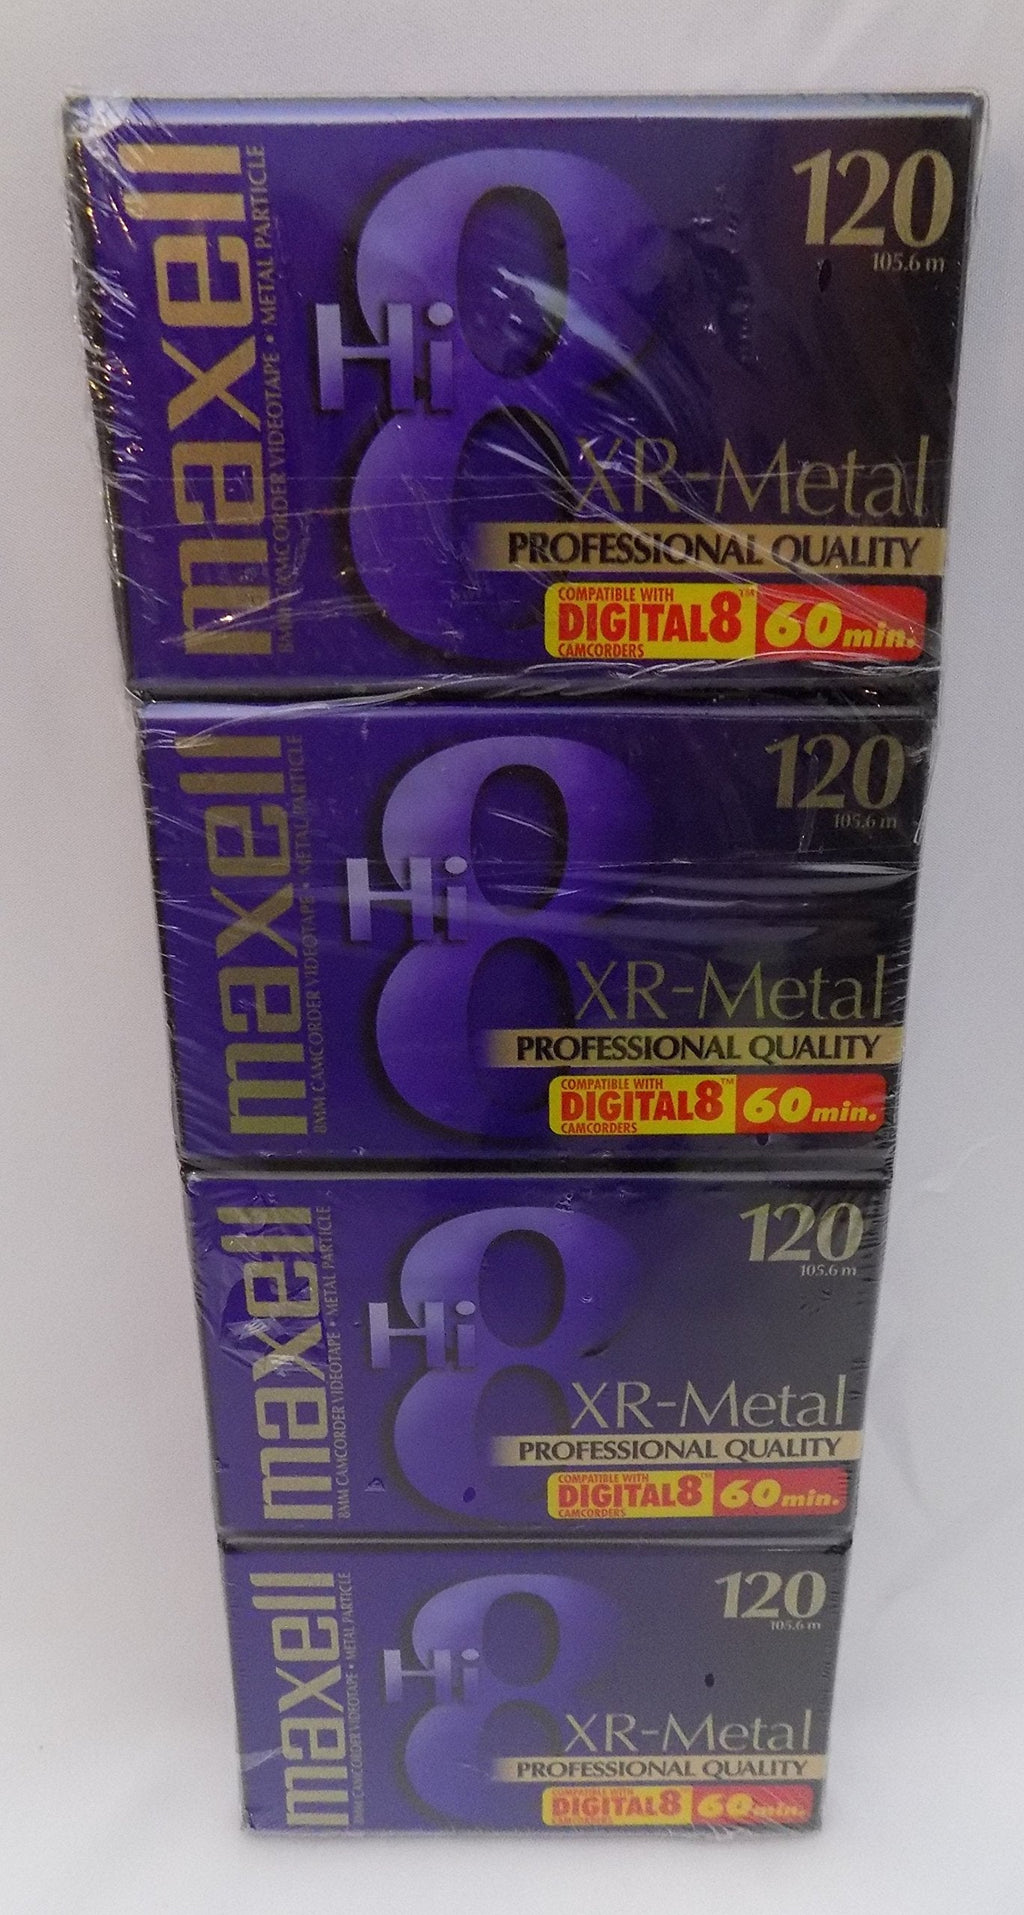 Maxell XR-Metal Professional Quality Hi 8 Camcorder Videotape 4 Pack